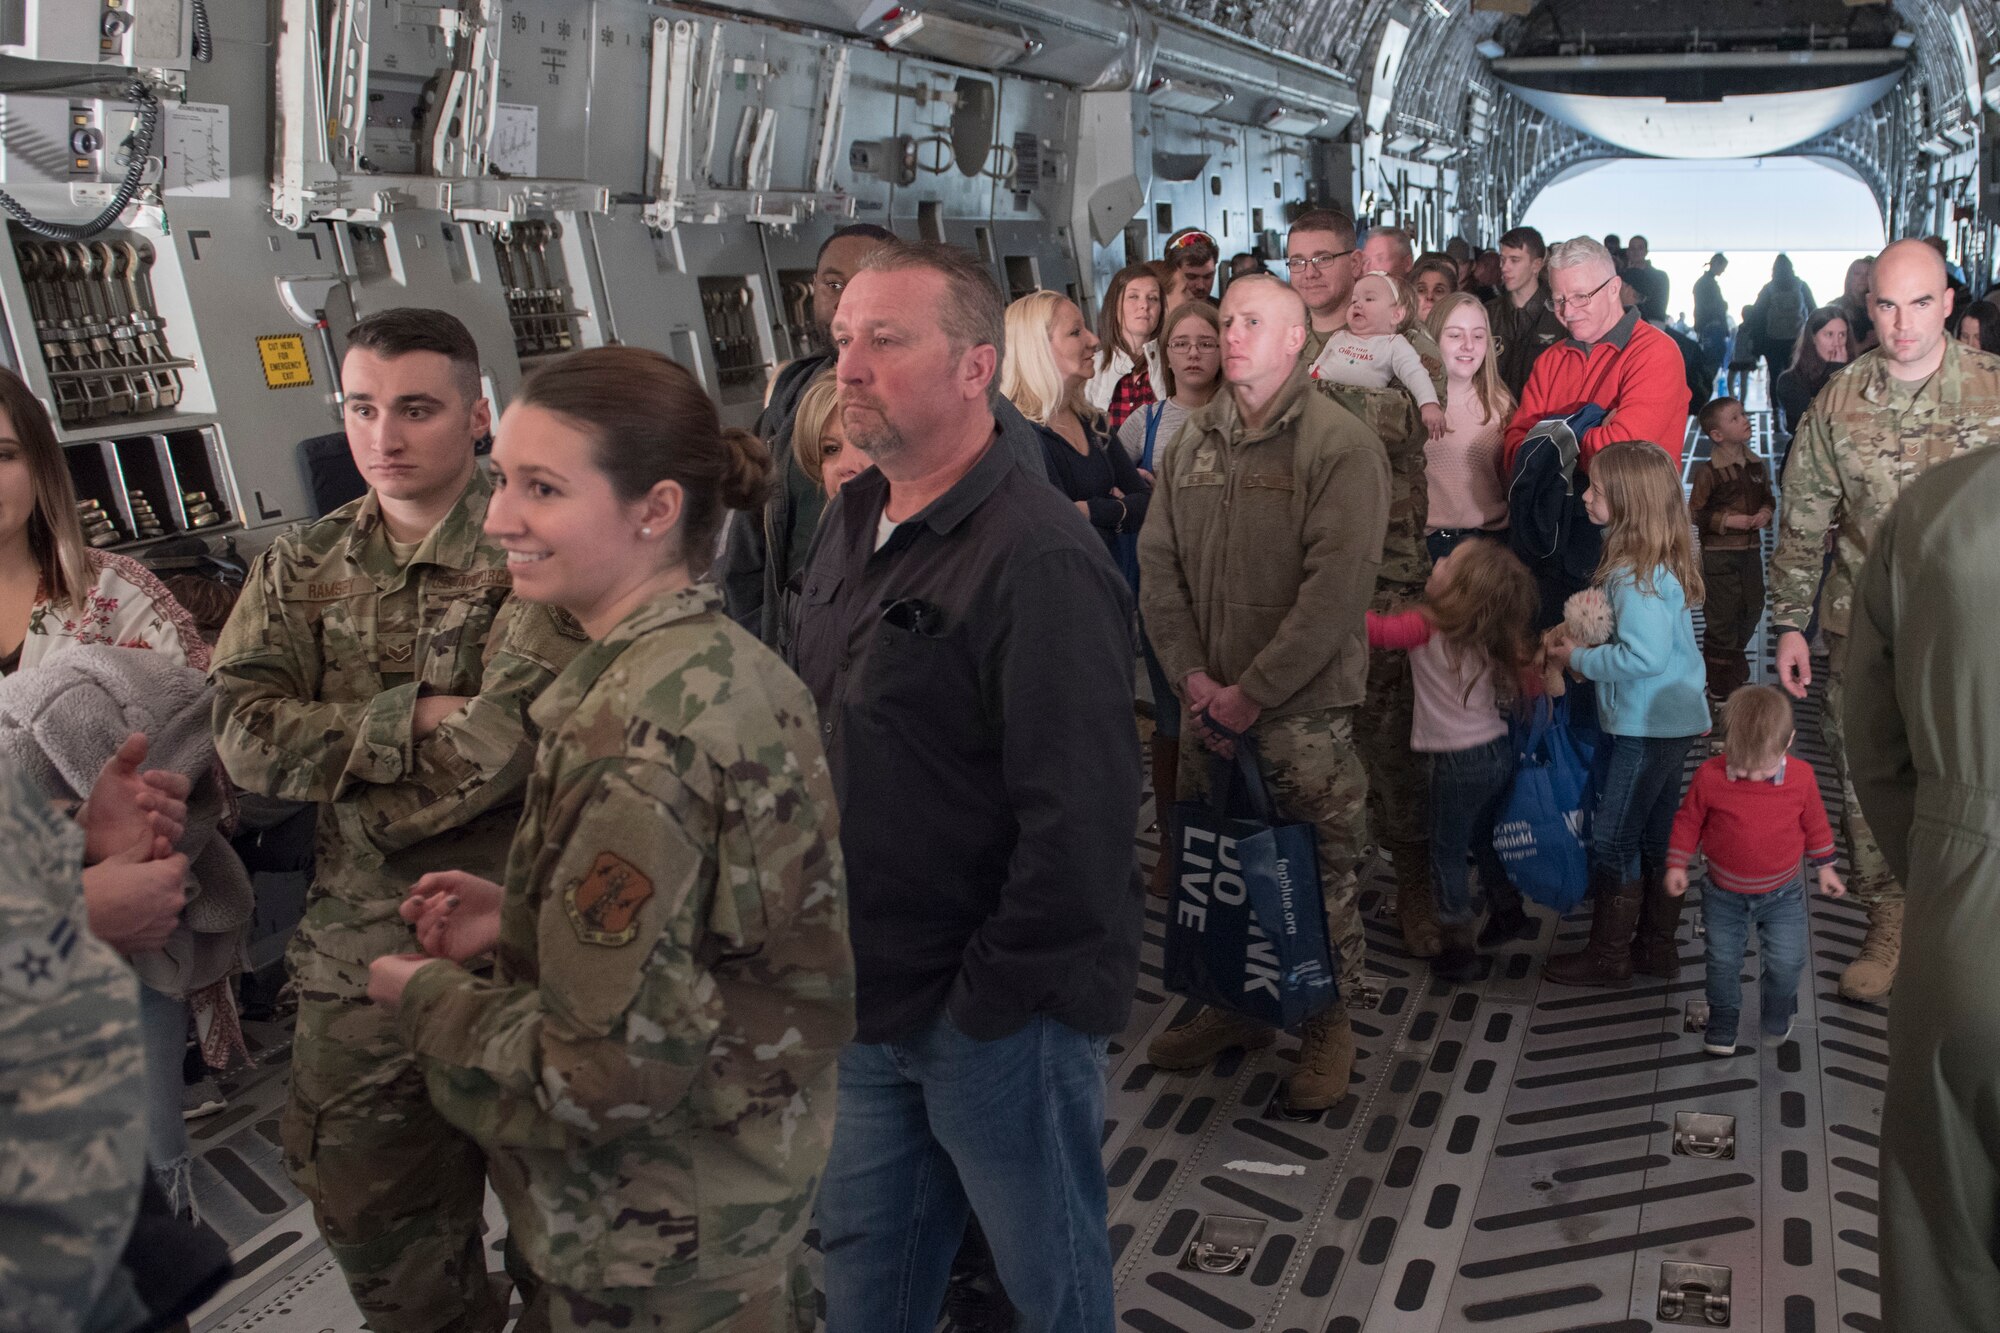 Airmen and their families wait in line to see the cockpit of a C-17 Globemaster III aircraft as part of the 167th Airlift Wing family day event, Dec. 8, 2019